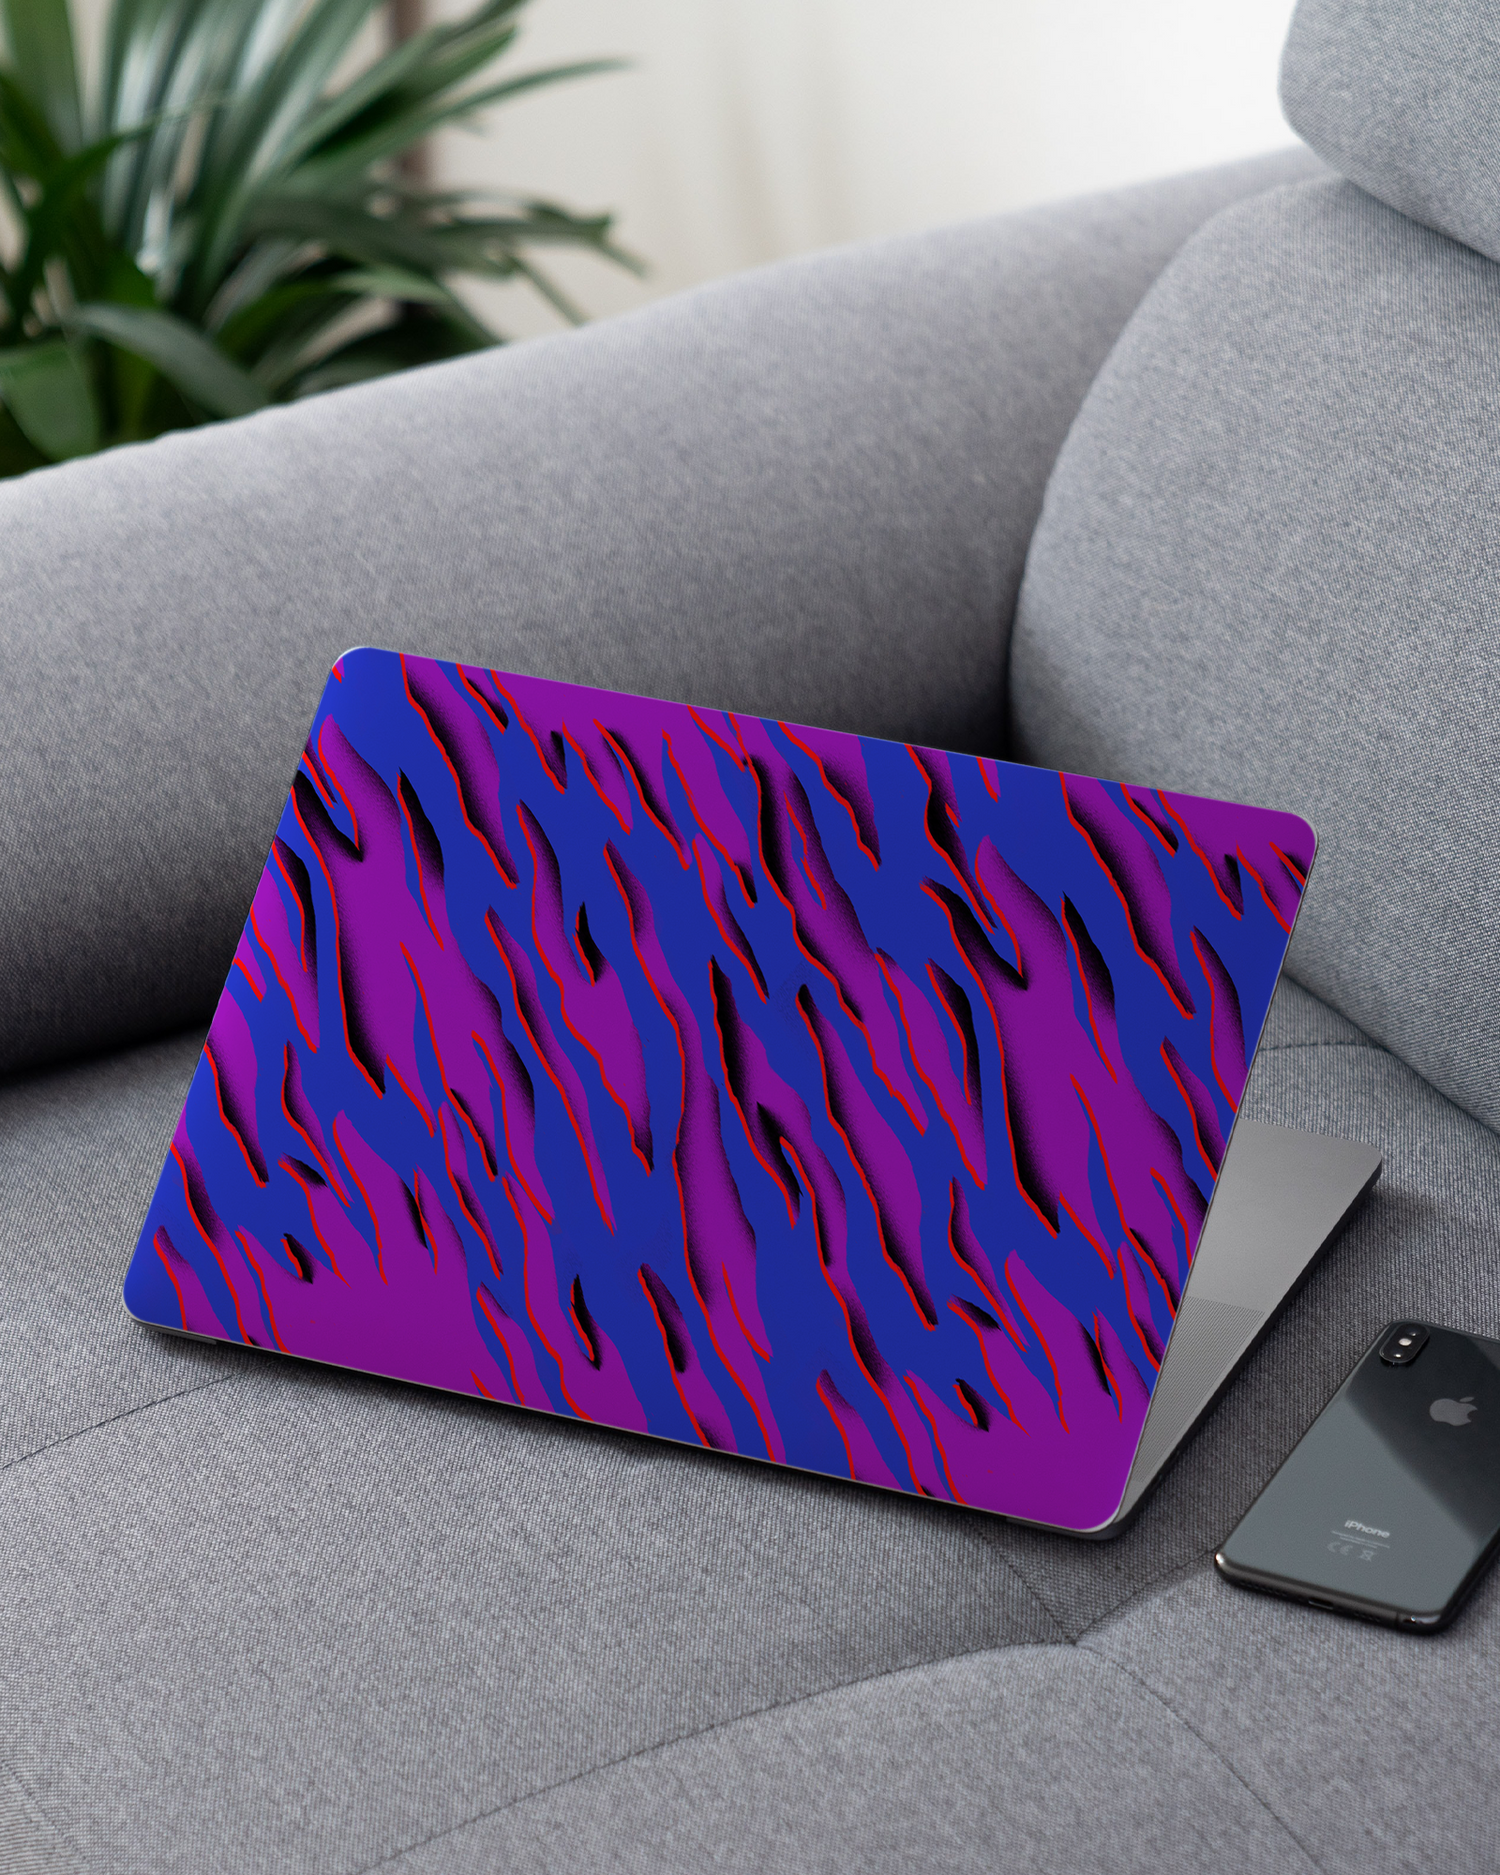 Electric Ocean 2 Laptop Skin for 13 inch Apple MacBooks on a couch